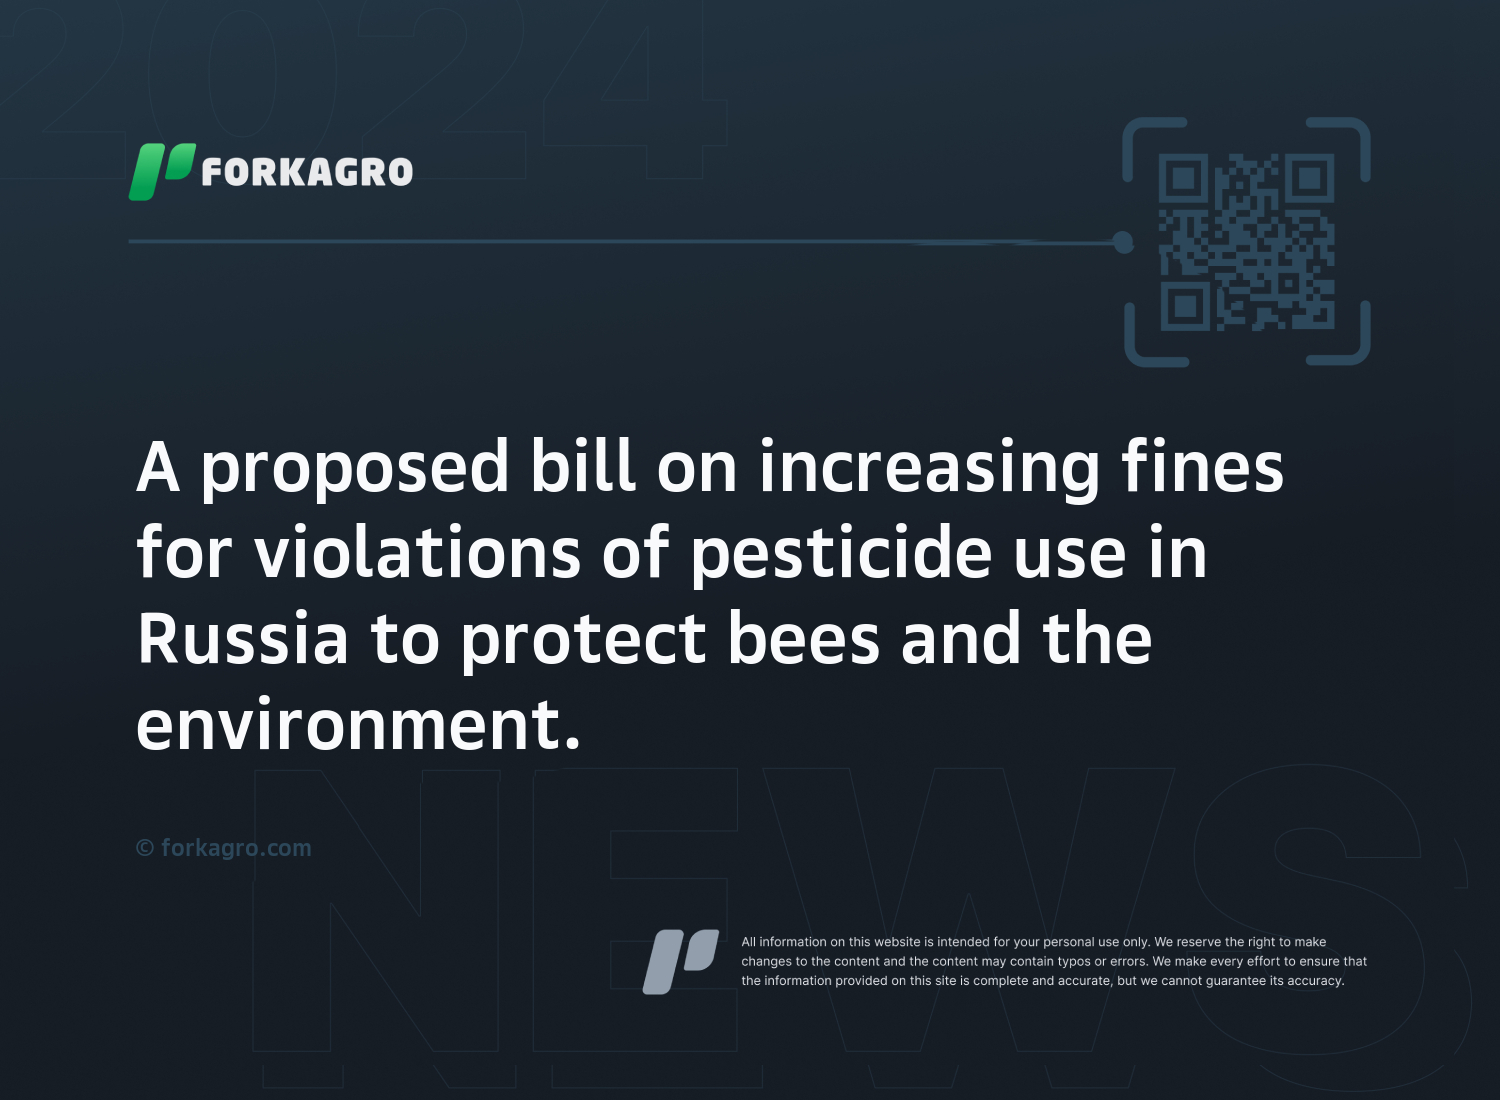 A proposed bill on increasing fines for violations of pesticide use in Russia to protect bees and the environment.